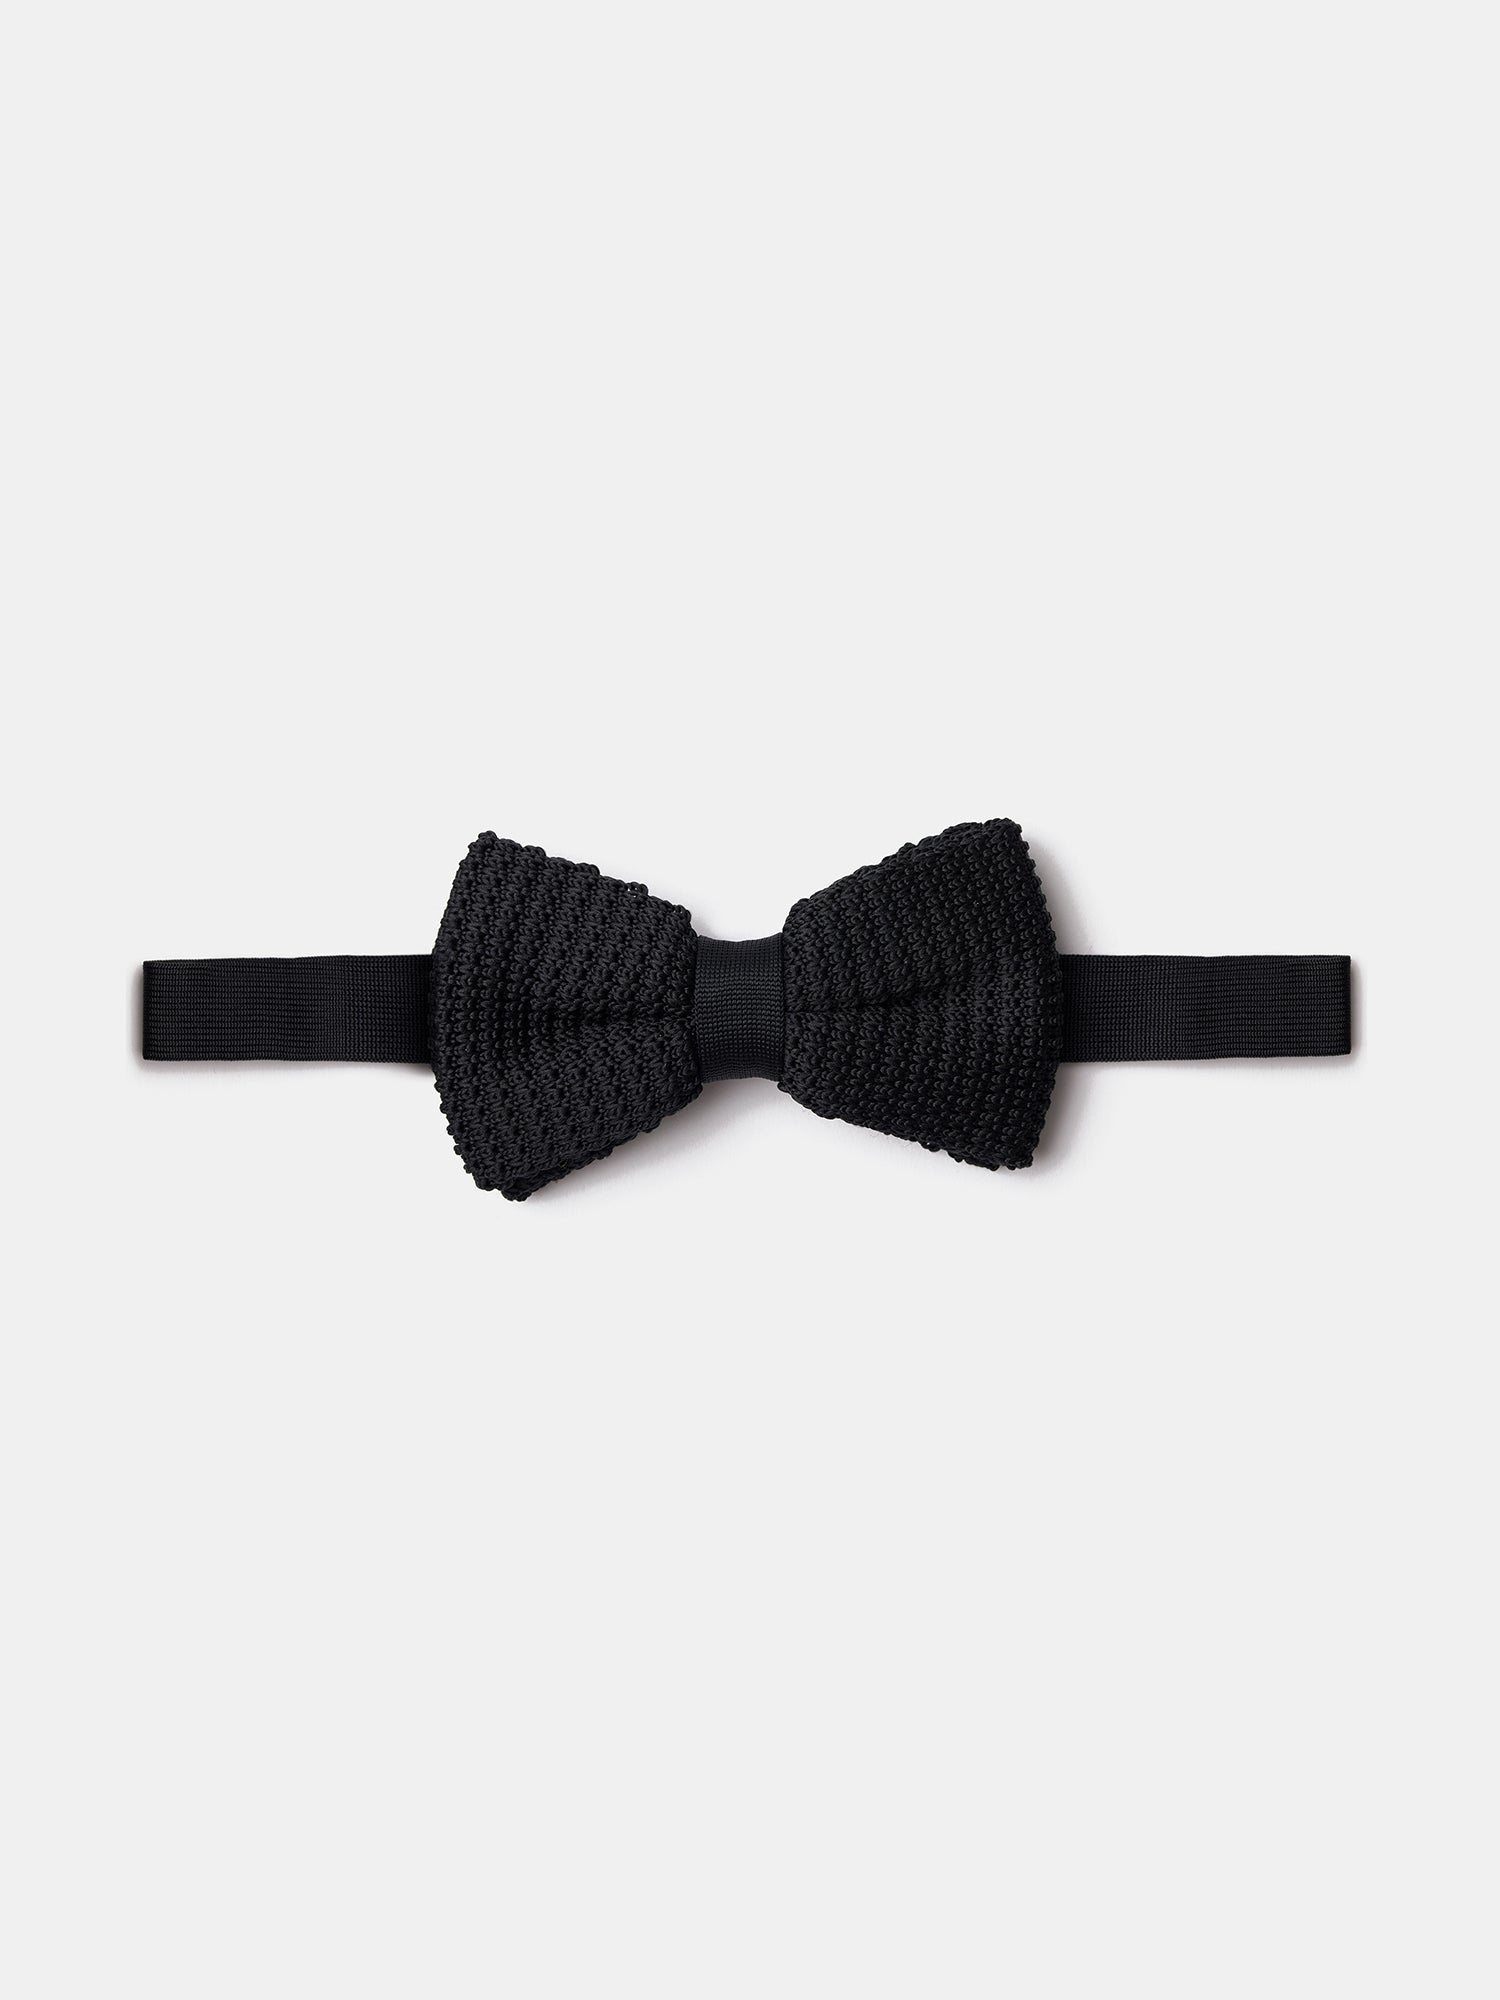 Black Knitted Bow Tie